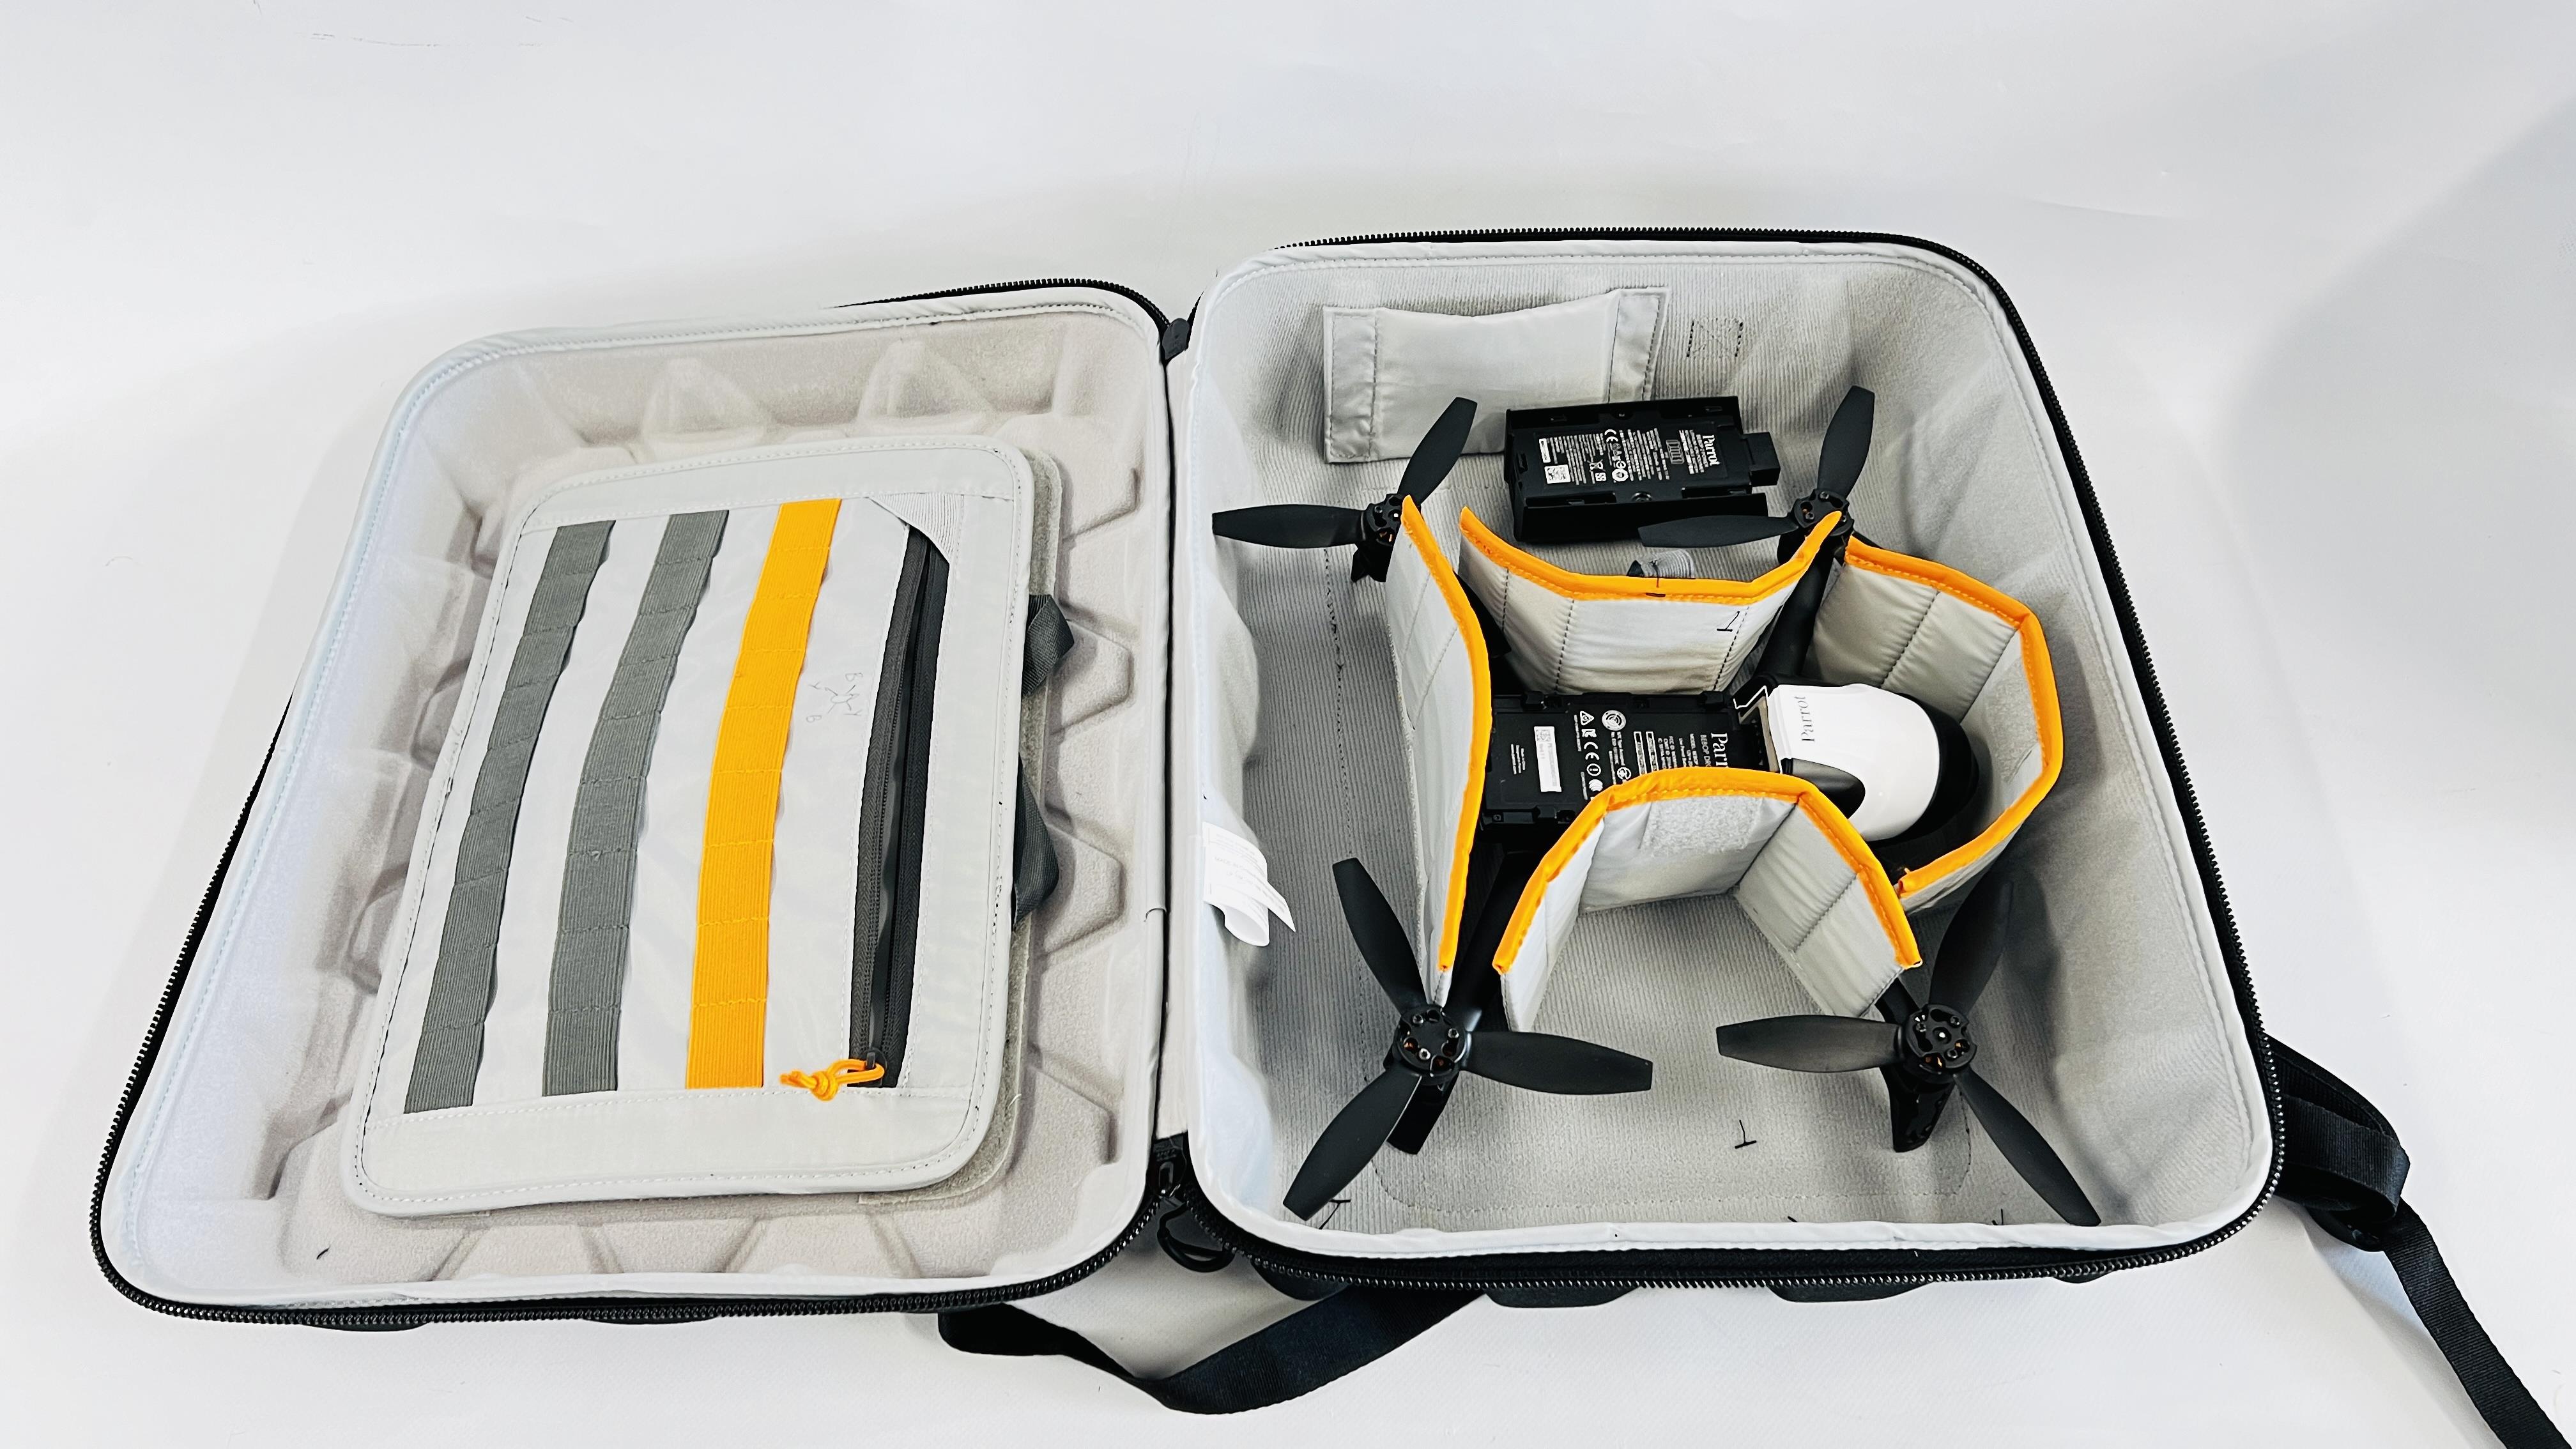 A PARROT BEBOP 2 FPV DRONE WITH LOPRO CARRY CASE AND ORIGINAL BOX - SOLD AS SEEN. - Image 2 of 9